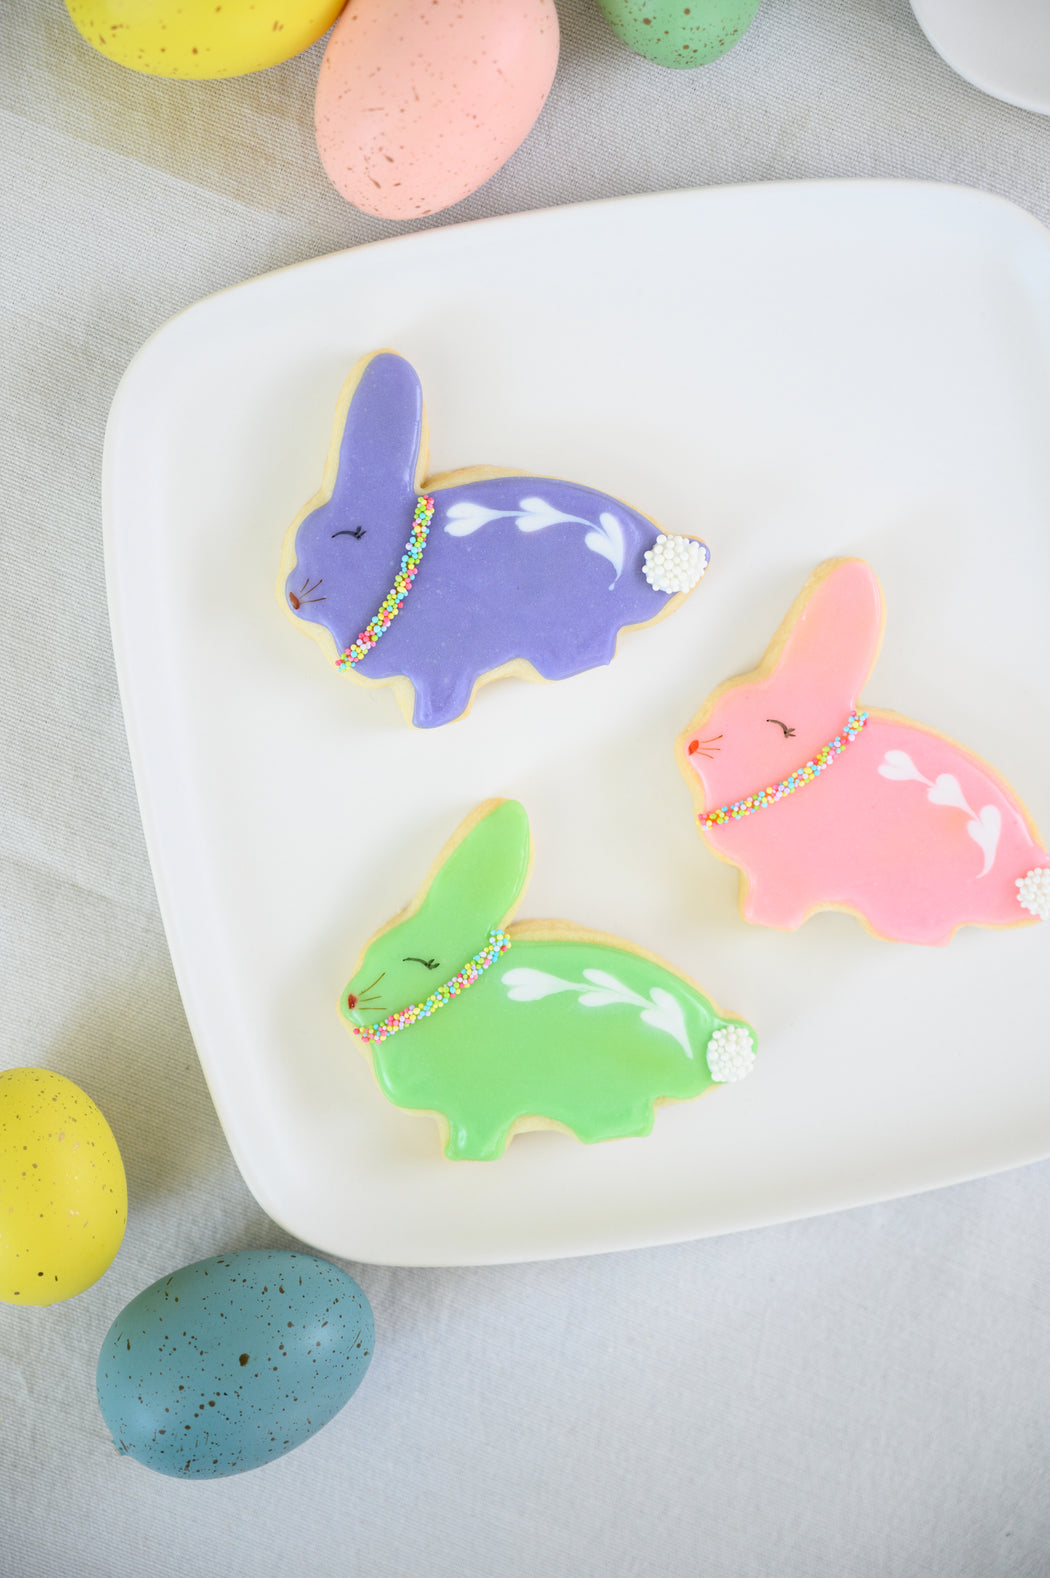 Decorated Easter Bunny Cookies.